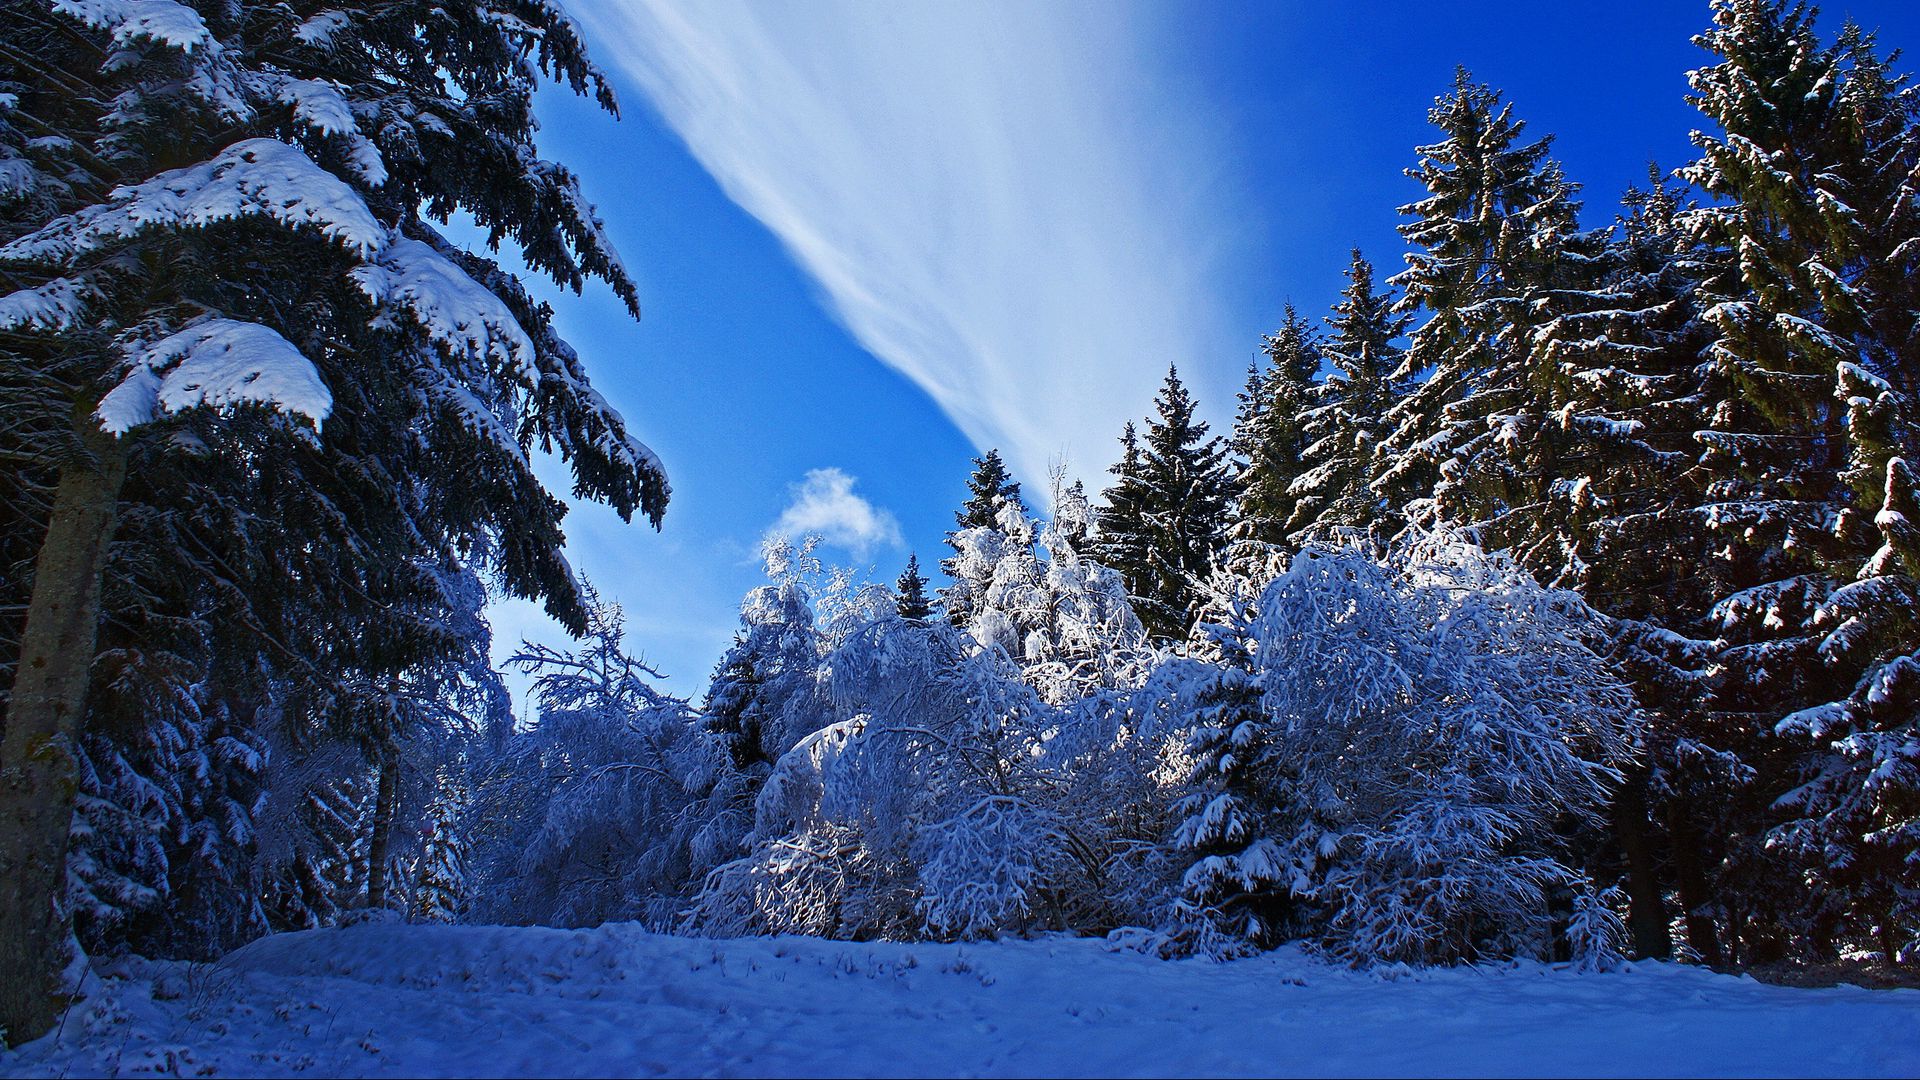 Download wallpaper 1920x1080 winter, forest, snow, sky full hd, hdtv, fhd, 1080p HD background